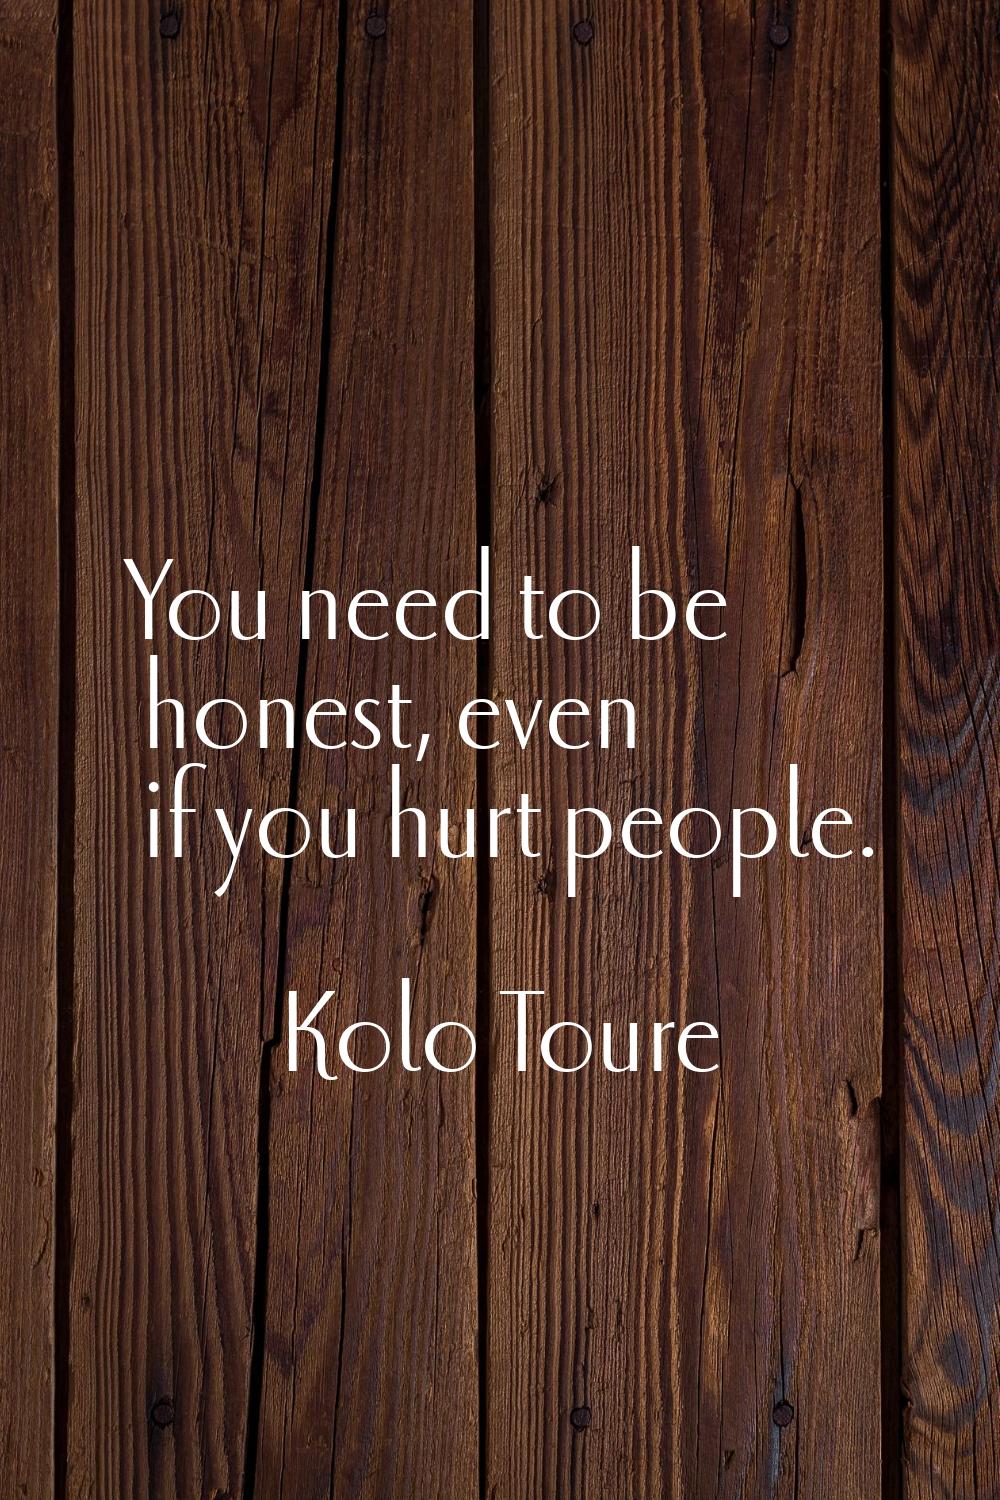 You need to be honest, even if you hurt people.